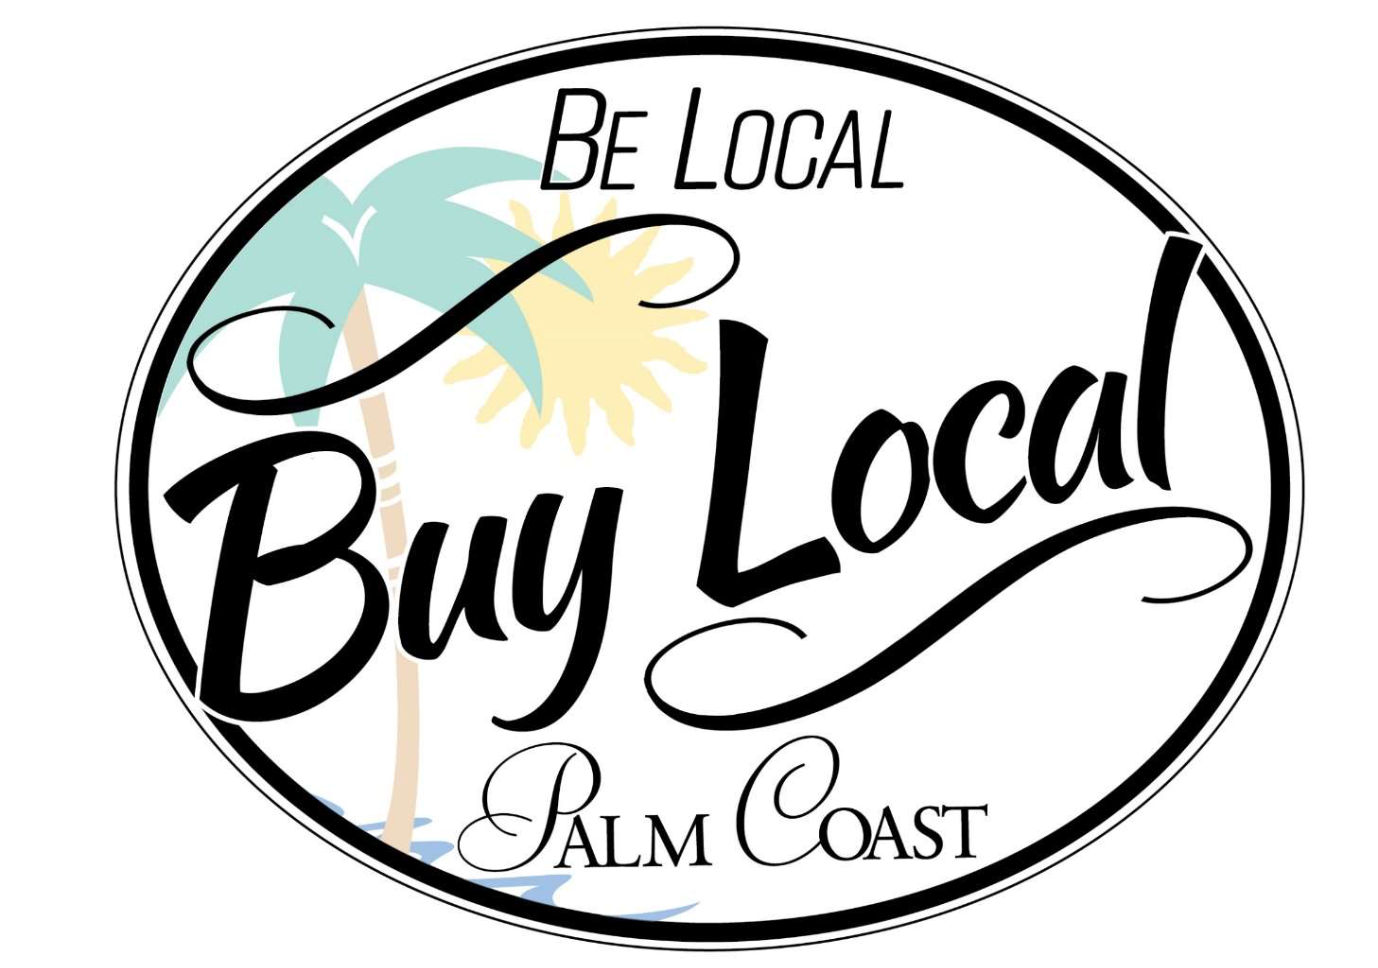 The draft logo for the 'be local, buy local' campaign. (Image courtesy of the city of Palm Coast)